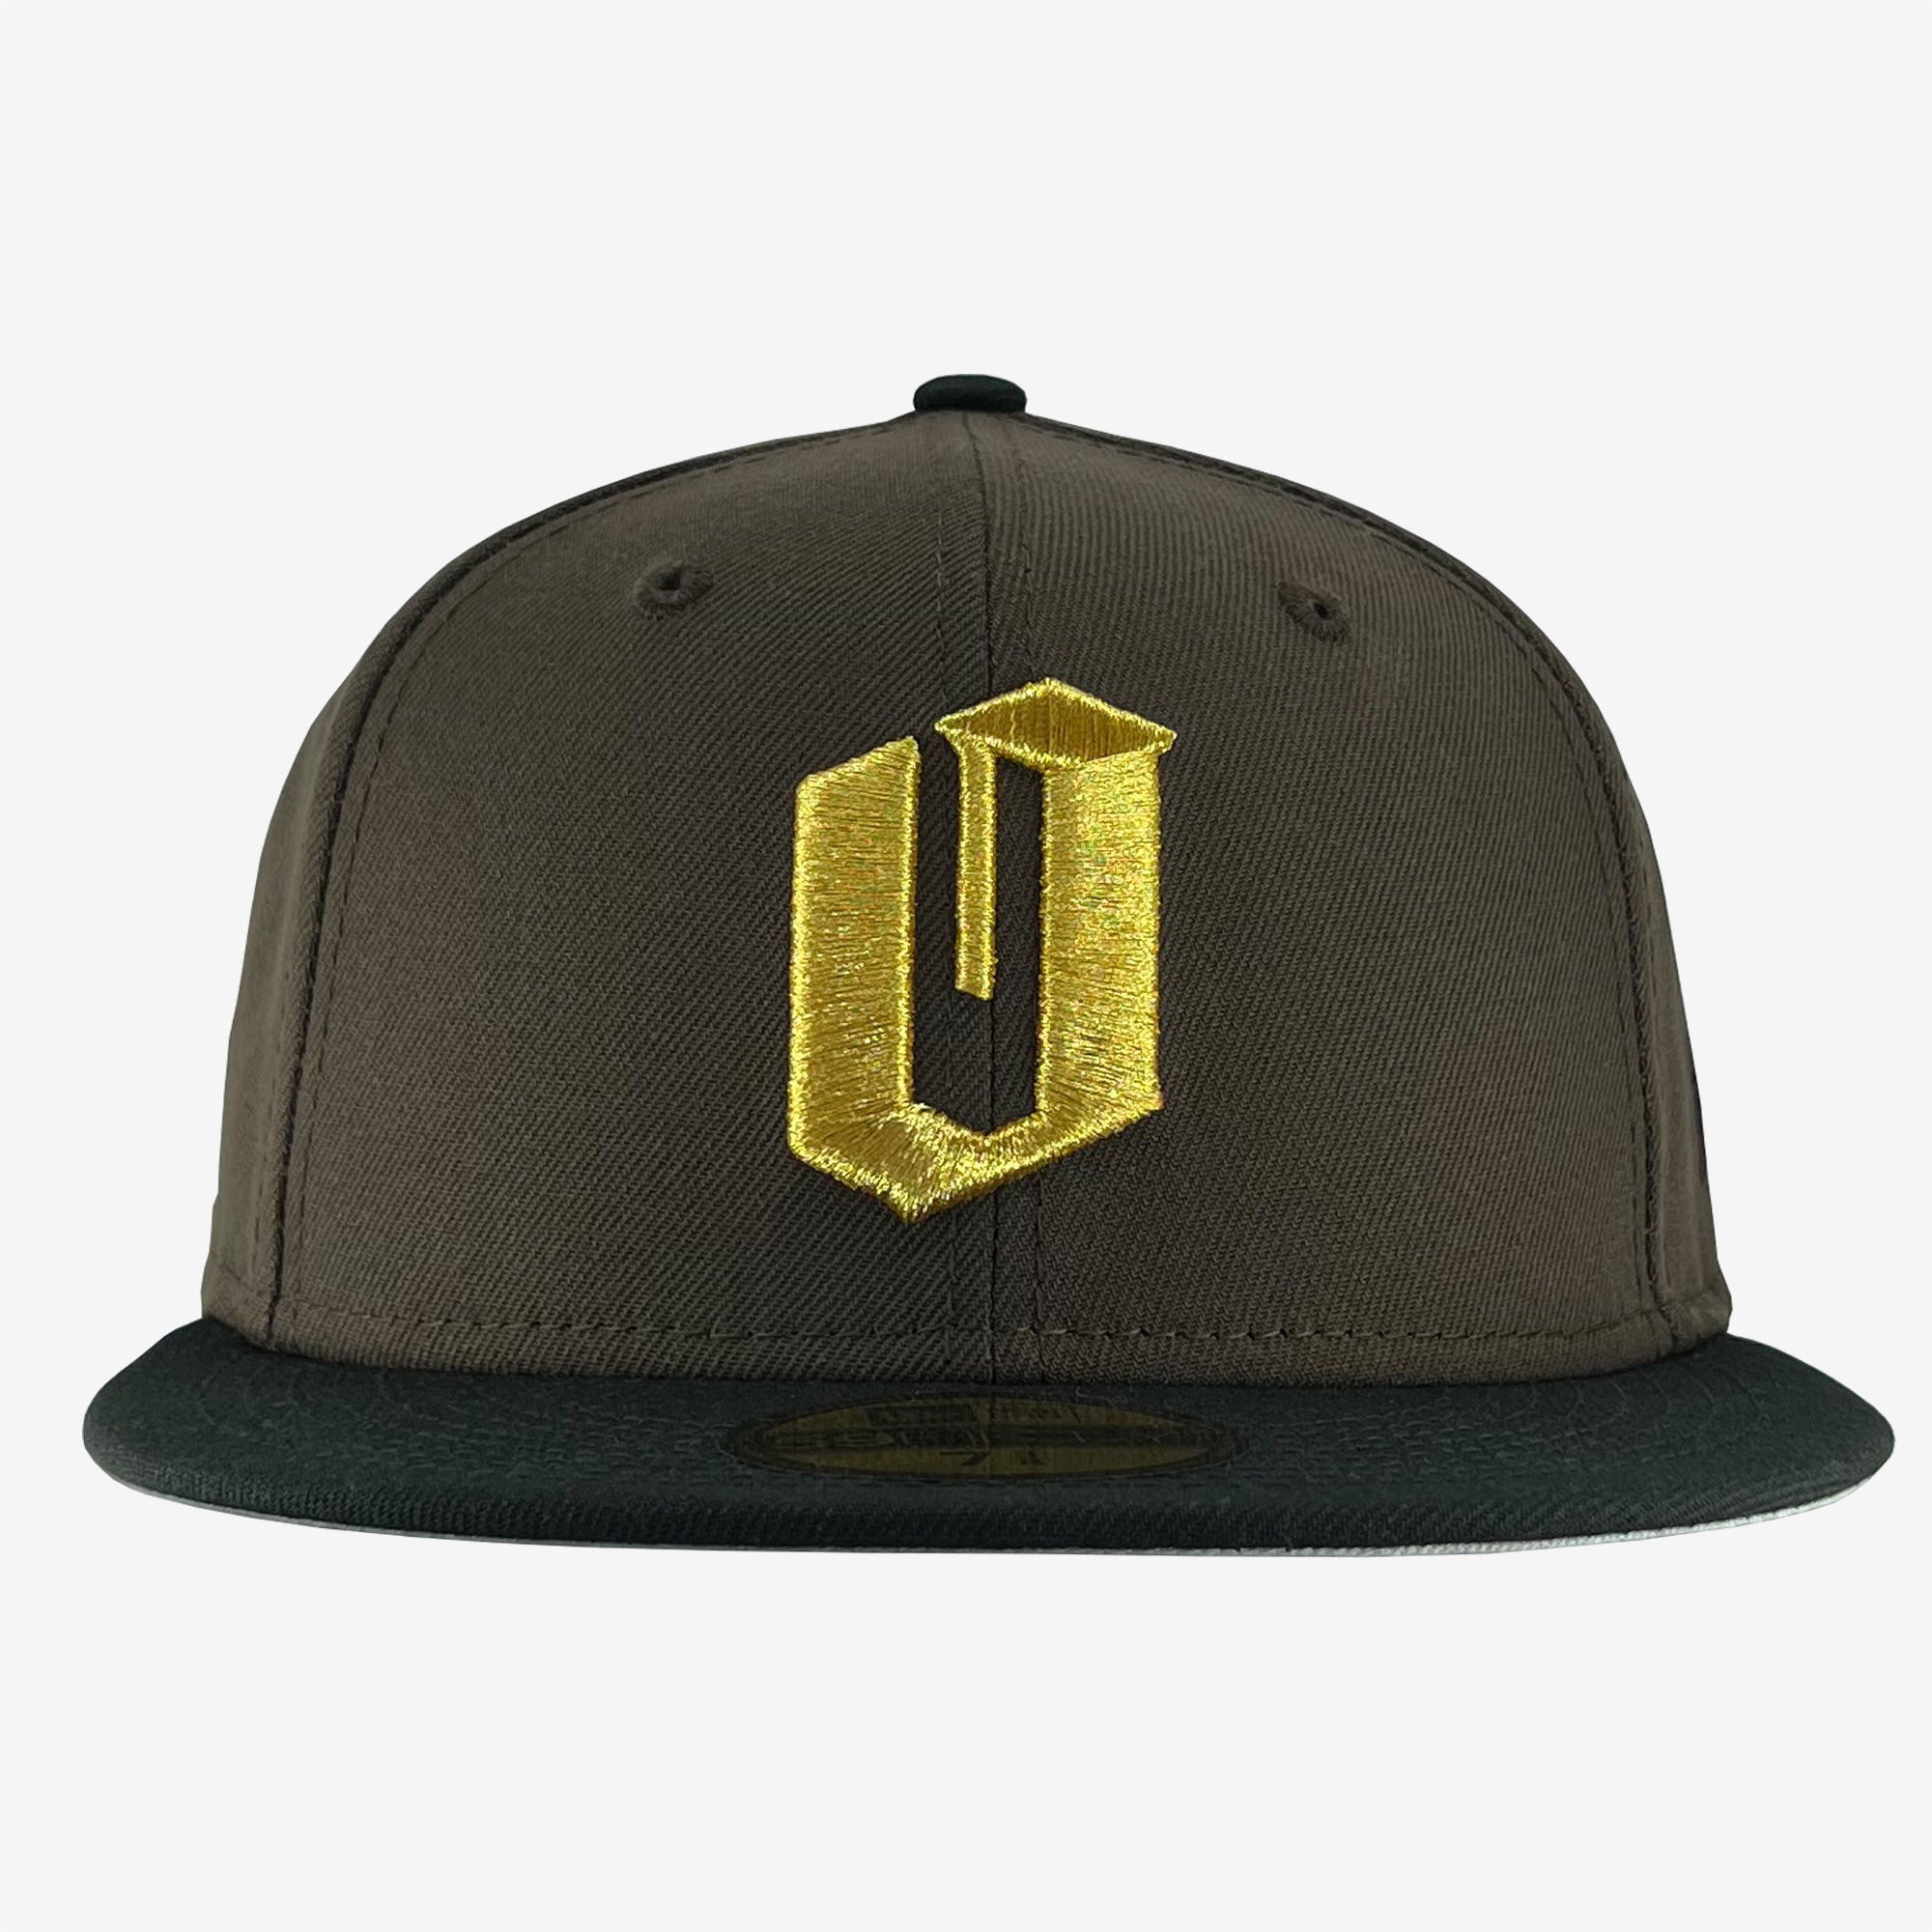 New Era 9FIFTY walnut brown cap with gold embroidered O for Oakland & black bill.